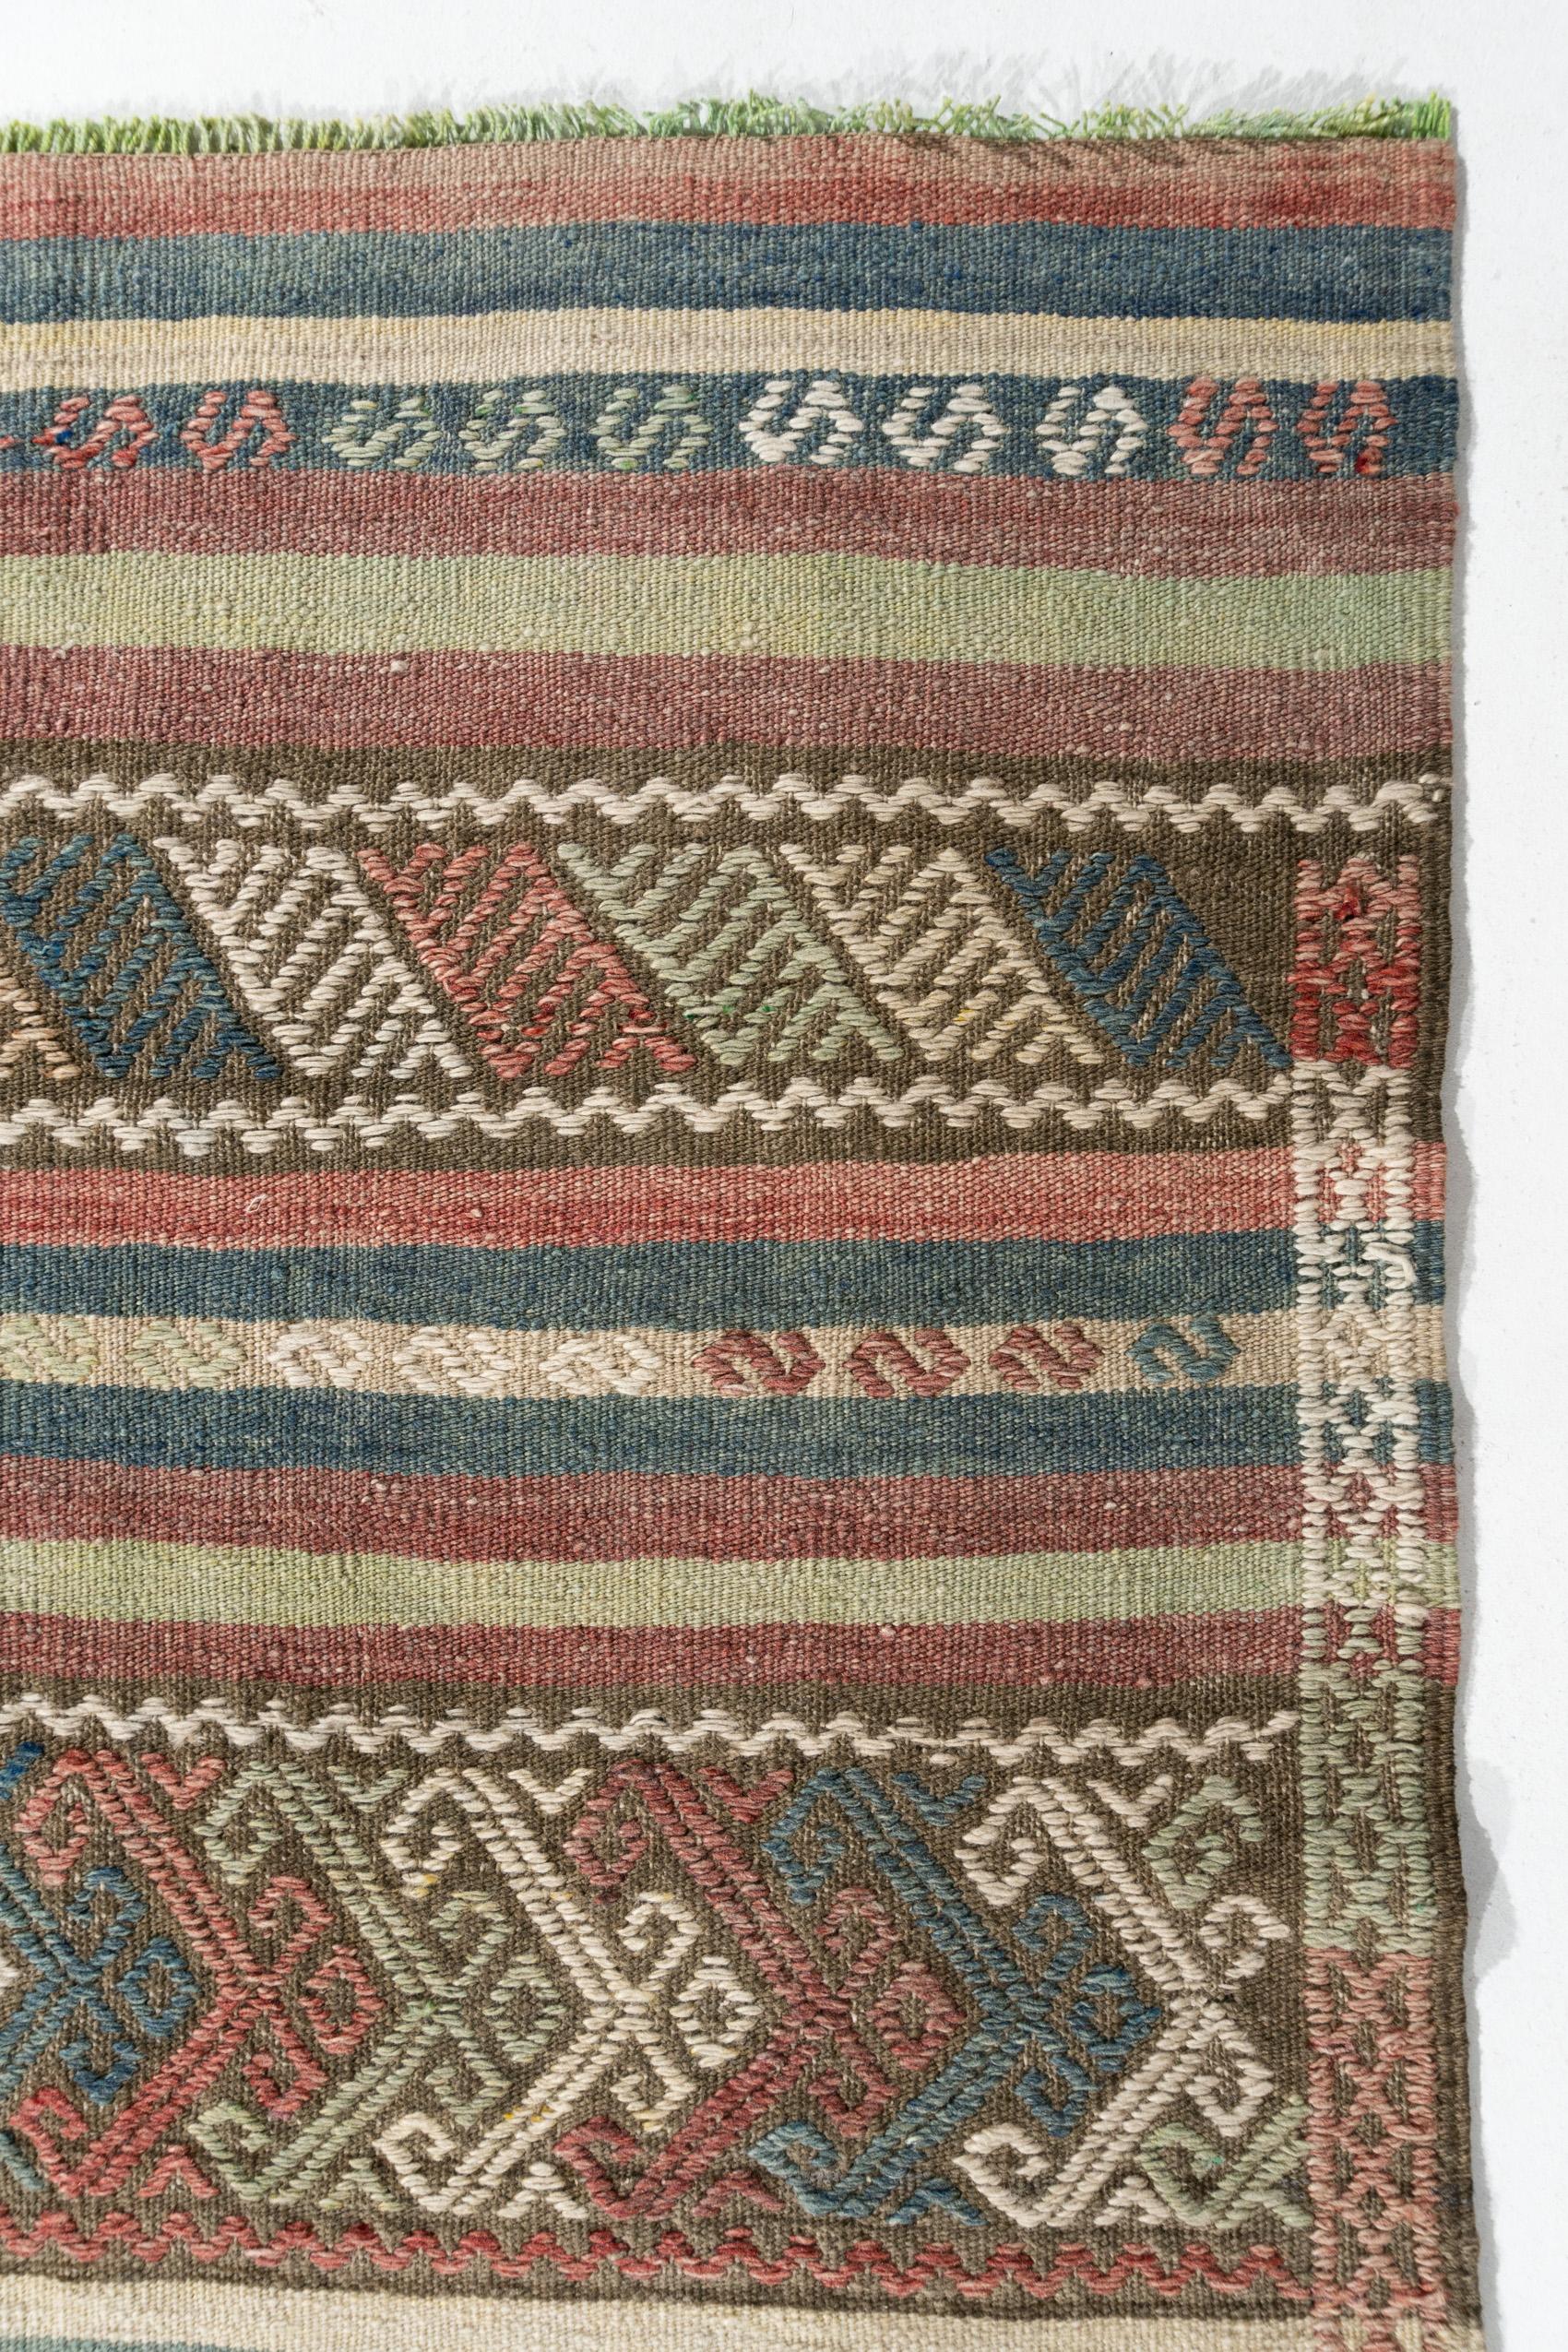 Vintage Turkish Flatweave Jajim Area rug 6'5 X 9'1. The Jajim (cecim) technique is followed in Turkey, Persia and the Caucasus and consists of a plain weave (equal warps and wefts) ground with an added (supplementary) weft pattern. The wefts are